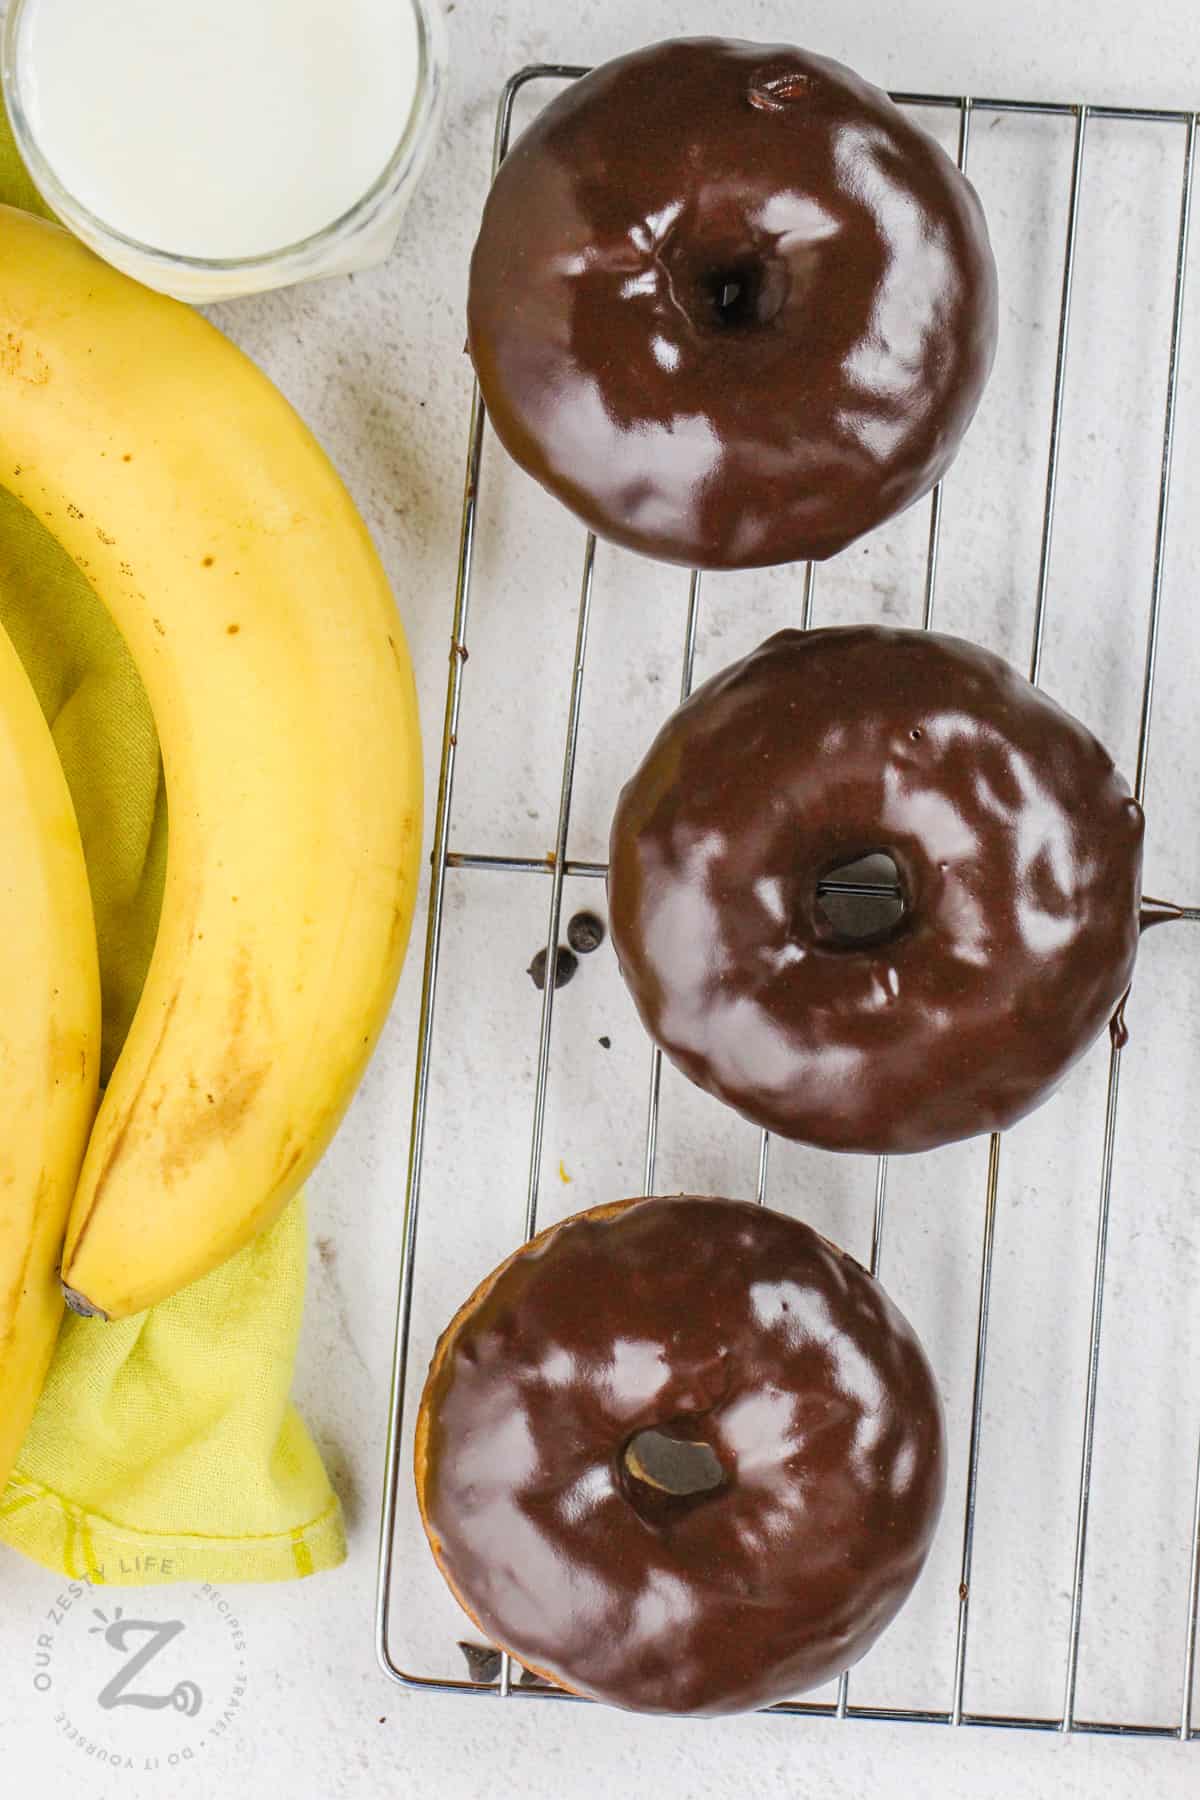 Banana Donuts with Chocolate Glaze cooling on a rack with bananas beside it